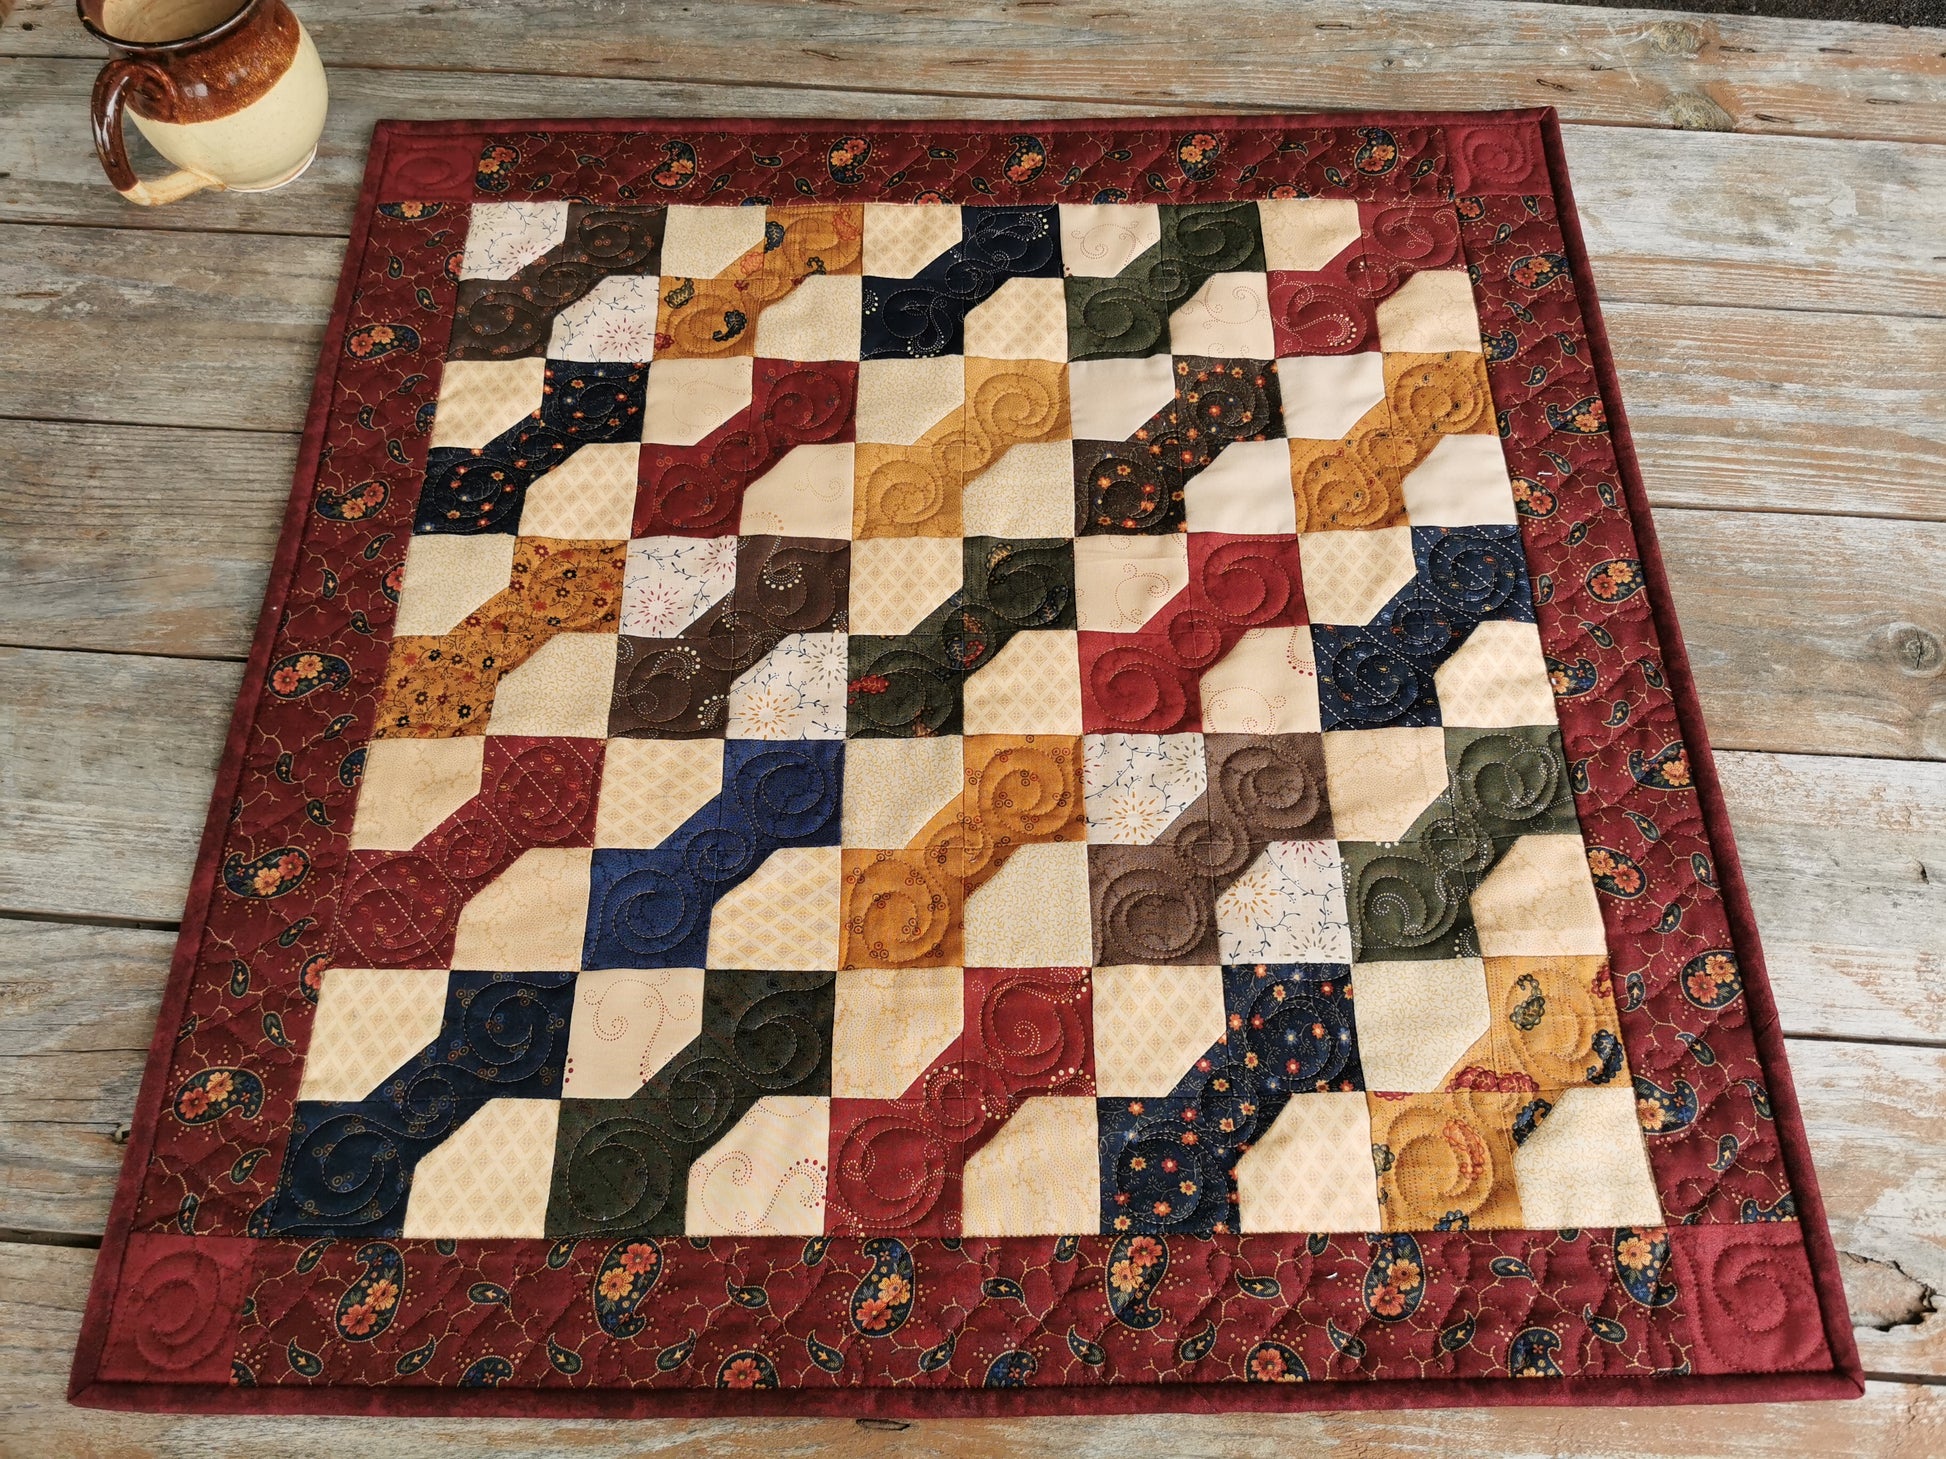 This square quilted table runner is made of bowtie patchwork surrounded by a deep country red floral print. Each bowtie is a different color from a collection of coordinating fabrics called Paisley Park by Kansas Troubles. This gives a lovely scrap quilt look. Bowtie colors include, deep blue, brown, red, burnt orange, green, antique gold.